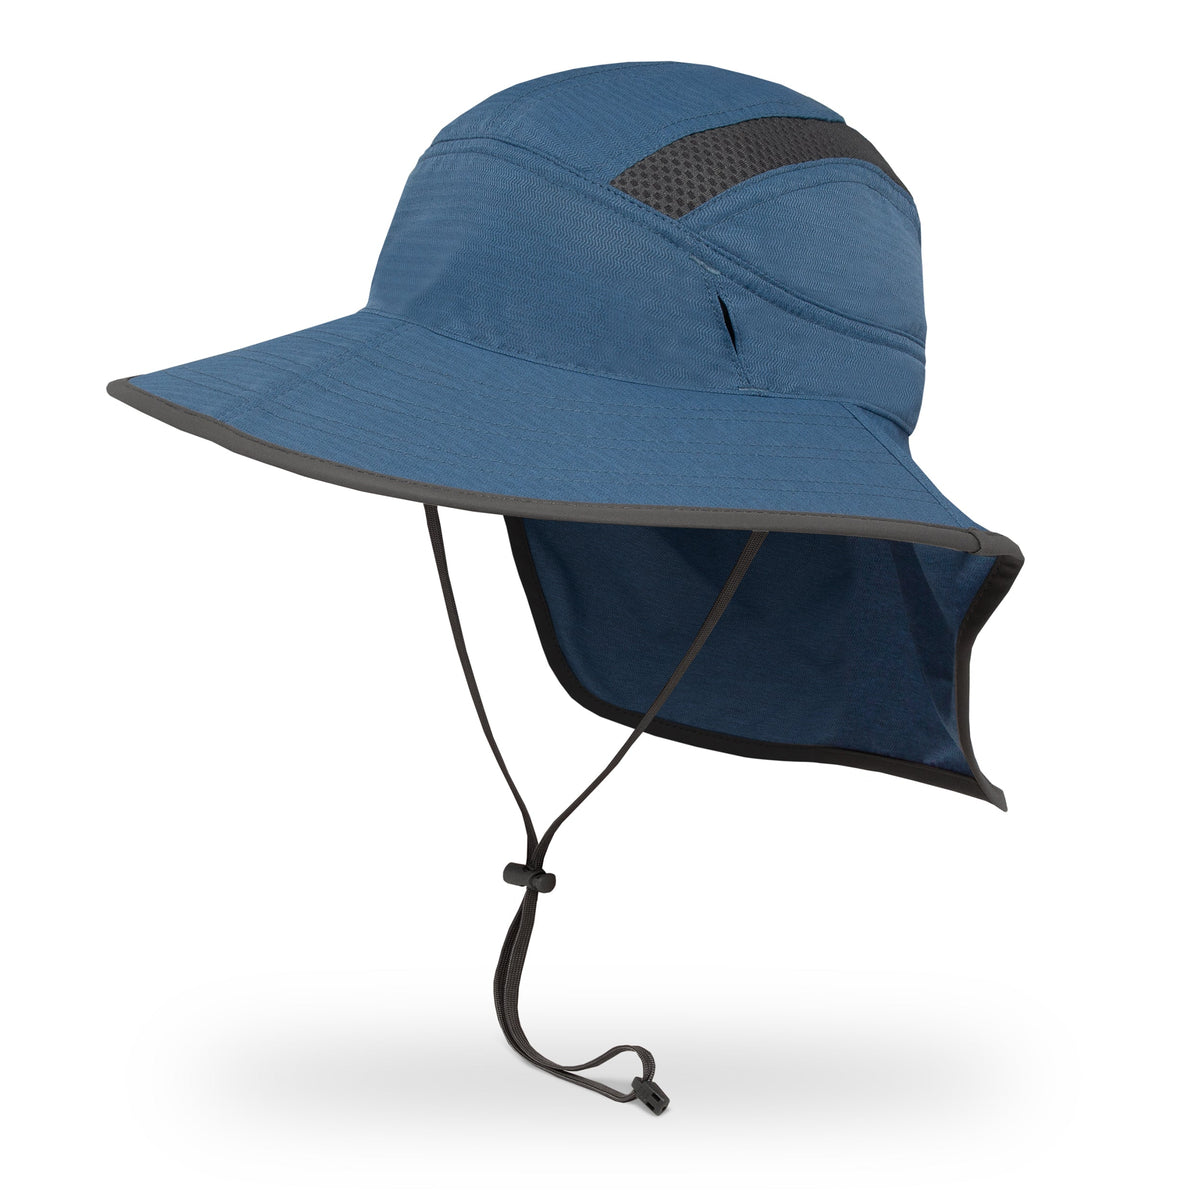 Designer Ink Painting Sun Hat with Neck Flap for Men Outdoor Mesh